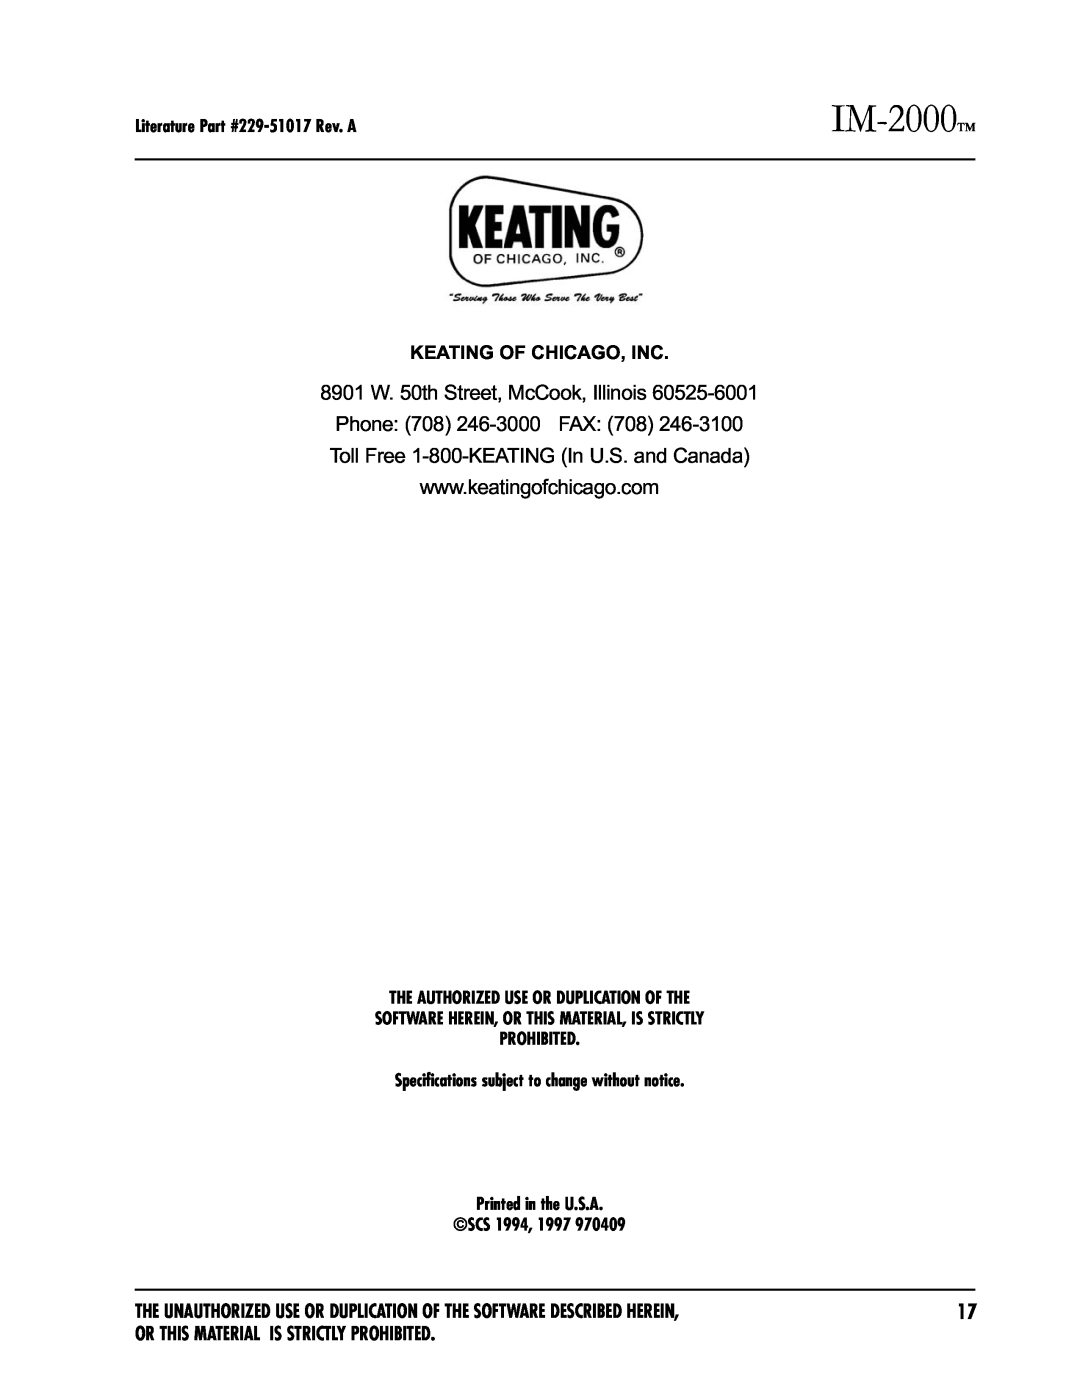 Keating Of Chicago IM-2000 manual Keating Of Chicago, Inc, Or This Material Is Strictly Prohibited 